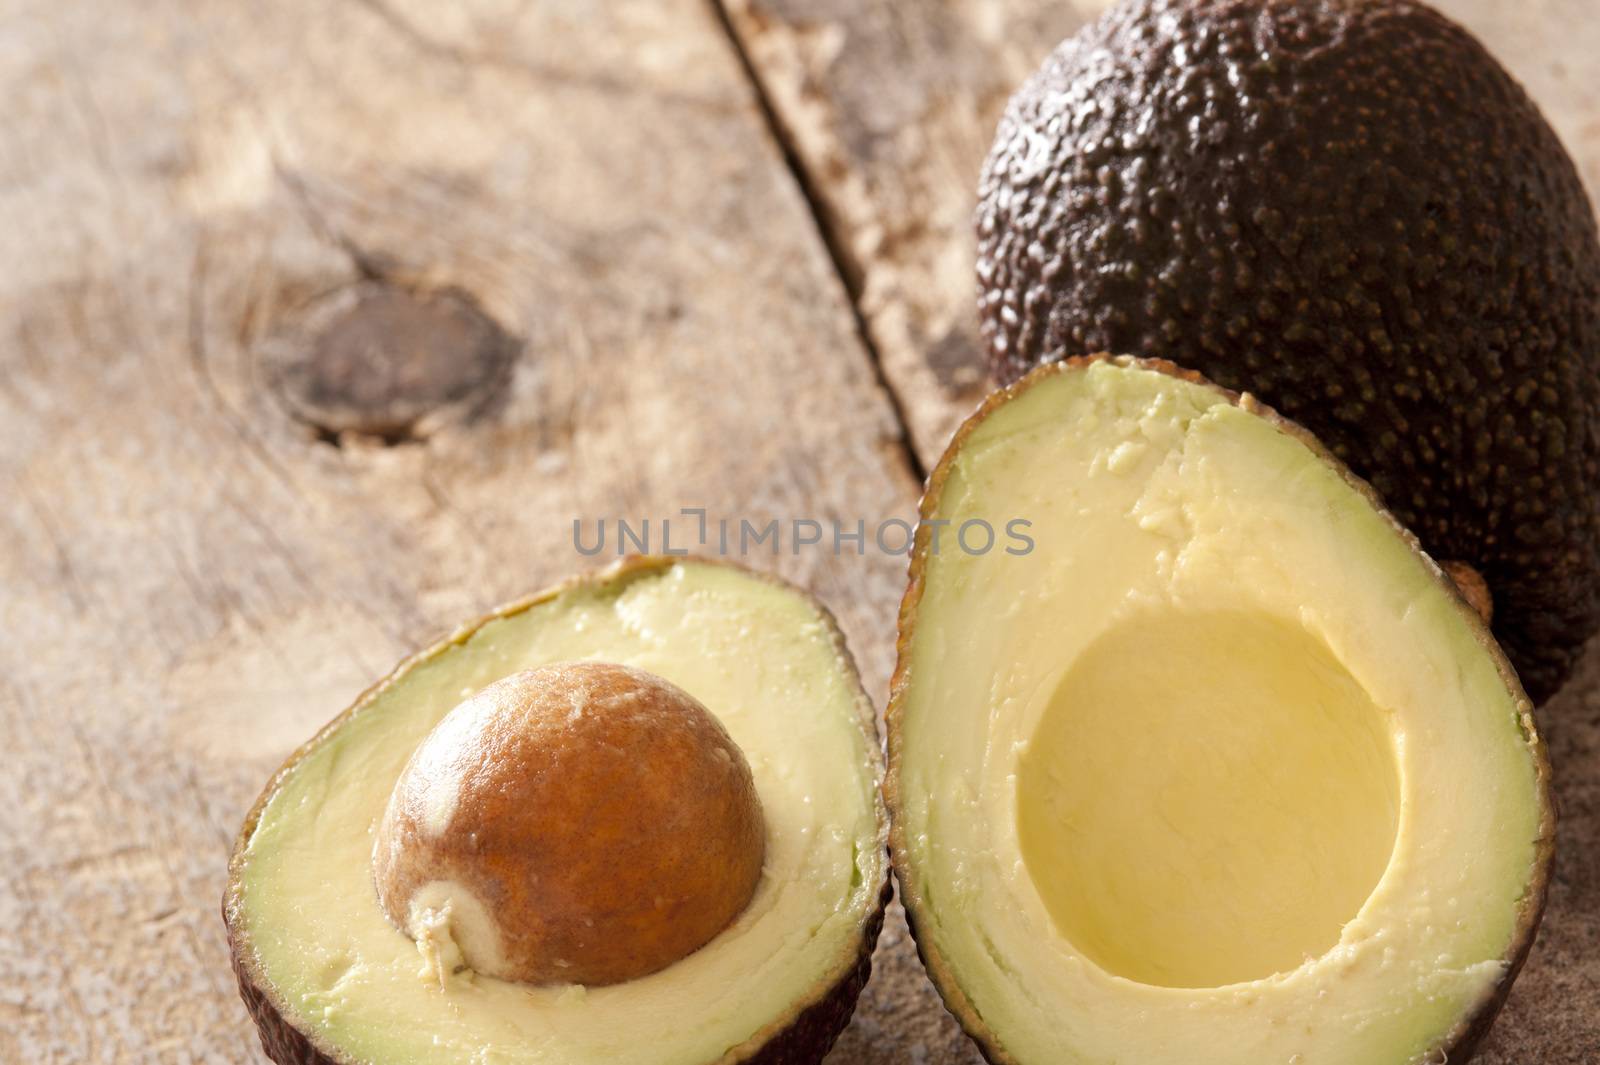 Pair of freshly cut and whole avocados on old wooden table with copy space over knot